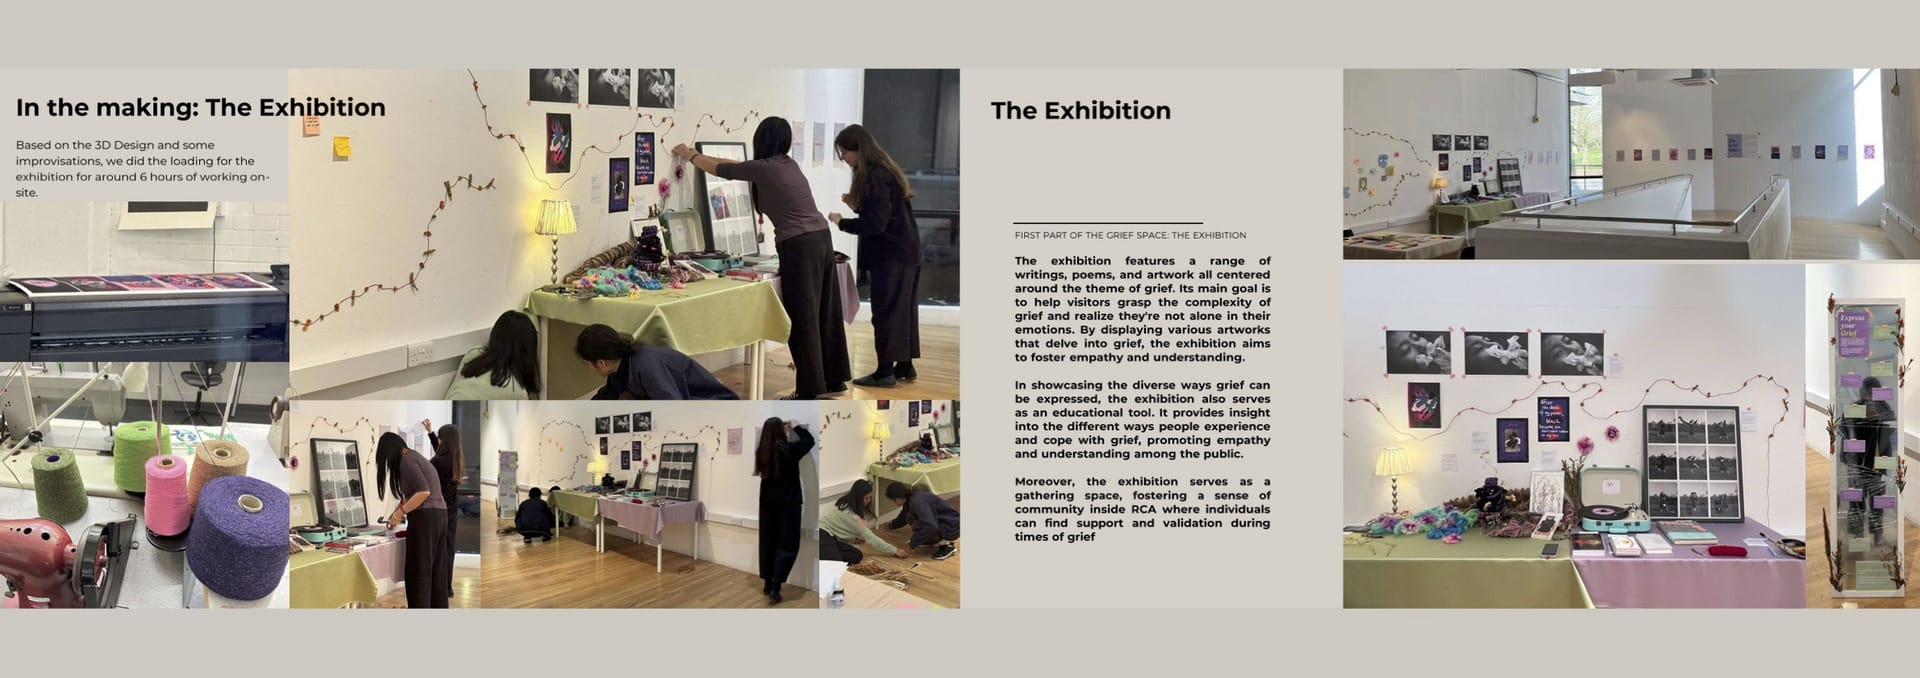 making the exhibition